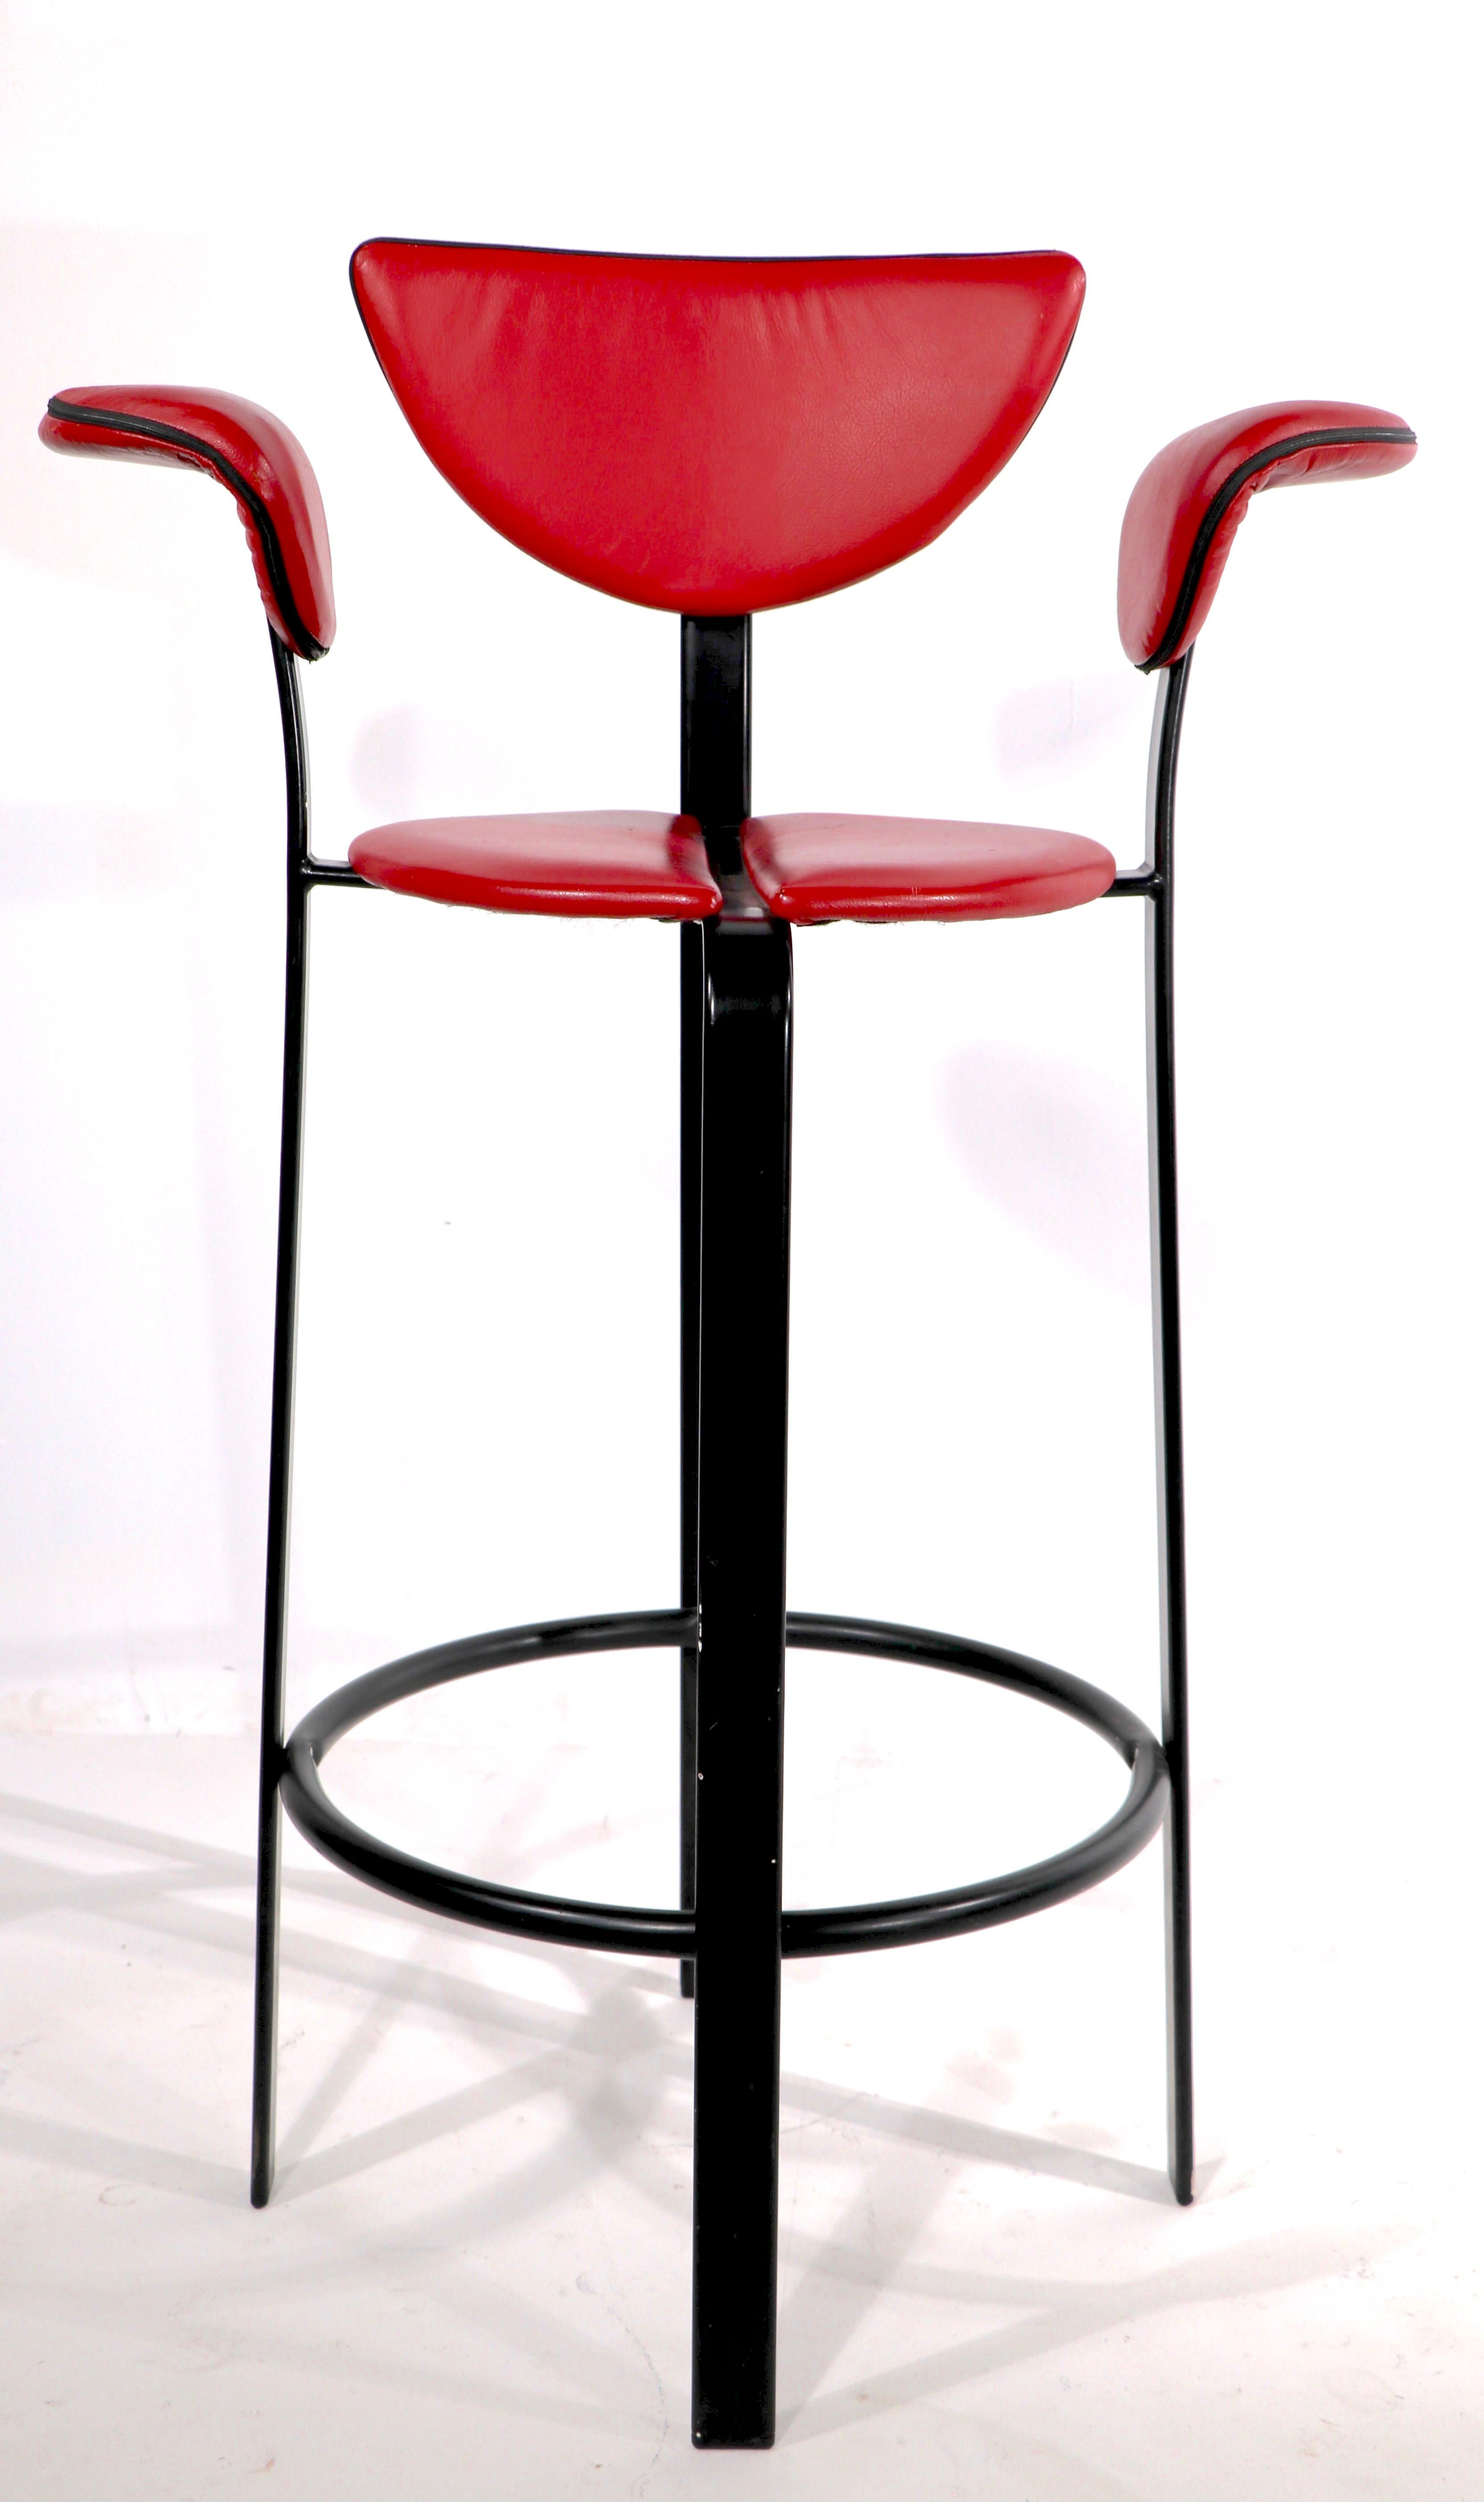 Chic postmodern tall bar stools marked BSK, made in Denmark. The stools feature red leather with black piping seats, backs, and arm rests on metal frames in black finish. Both are in very good, original condition, showing only light cosmetic wear,